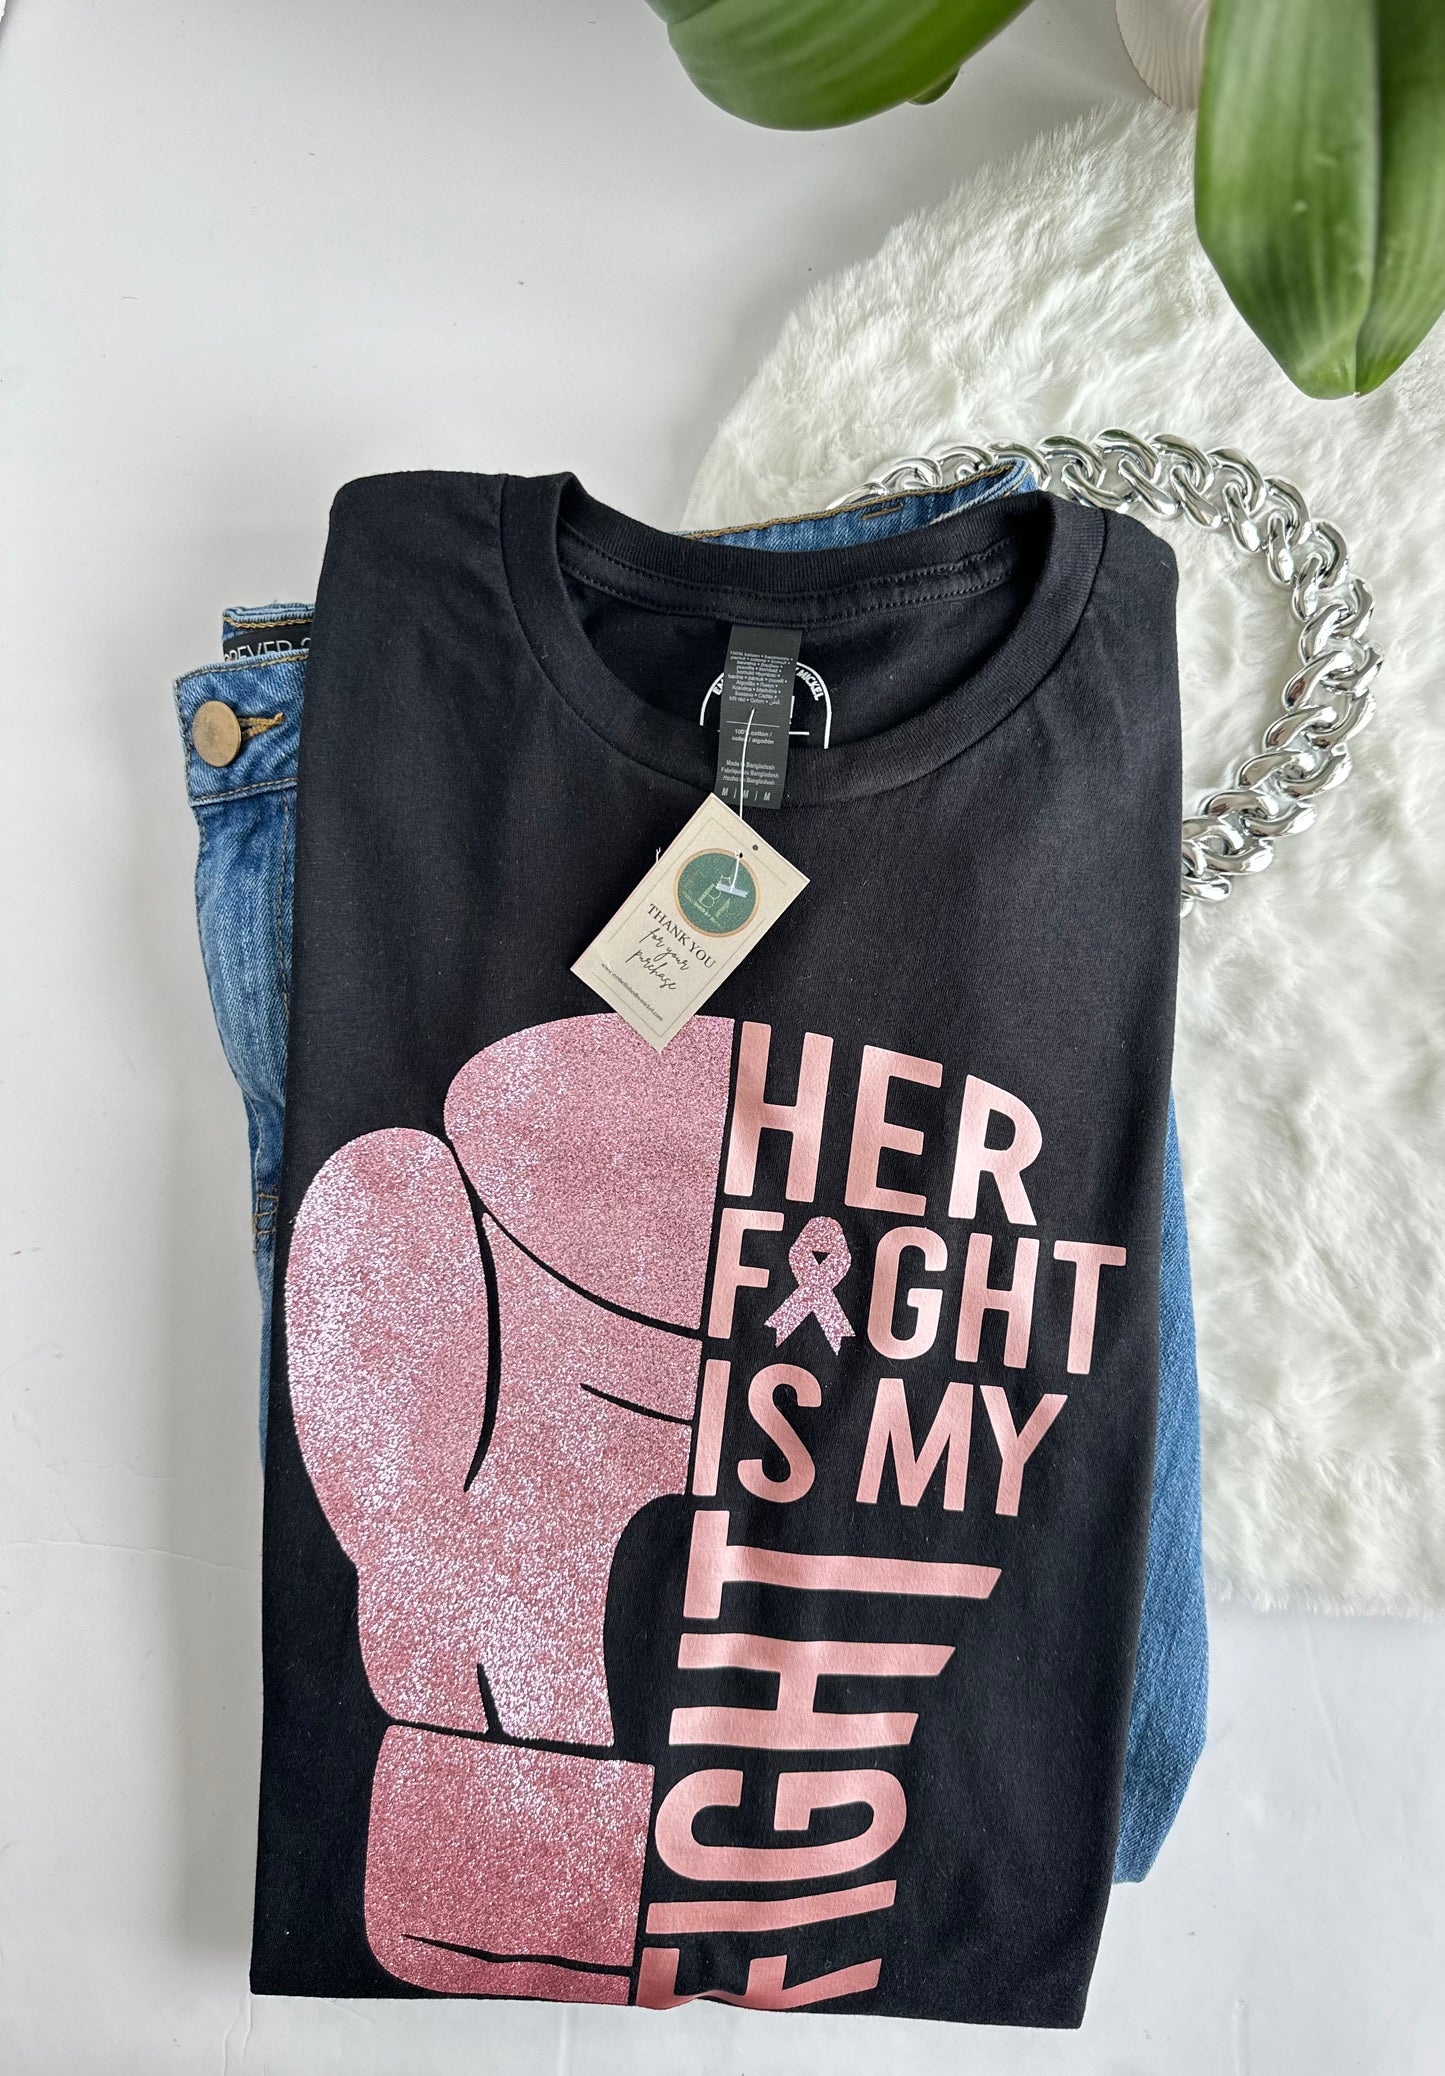 Her Fight Is Our Fight T-Shirt